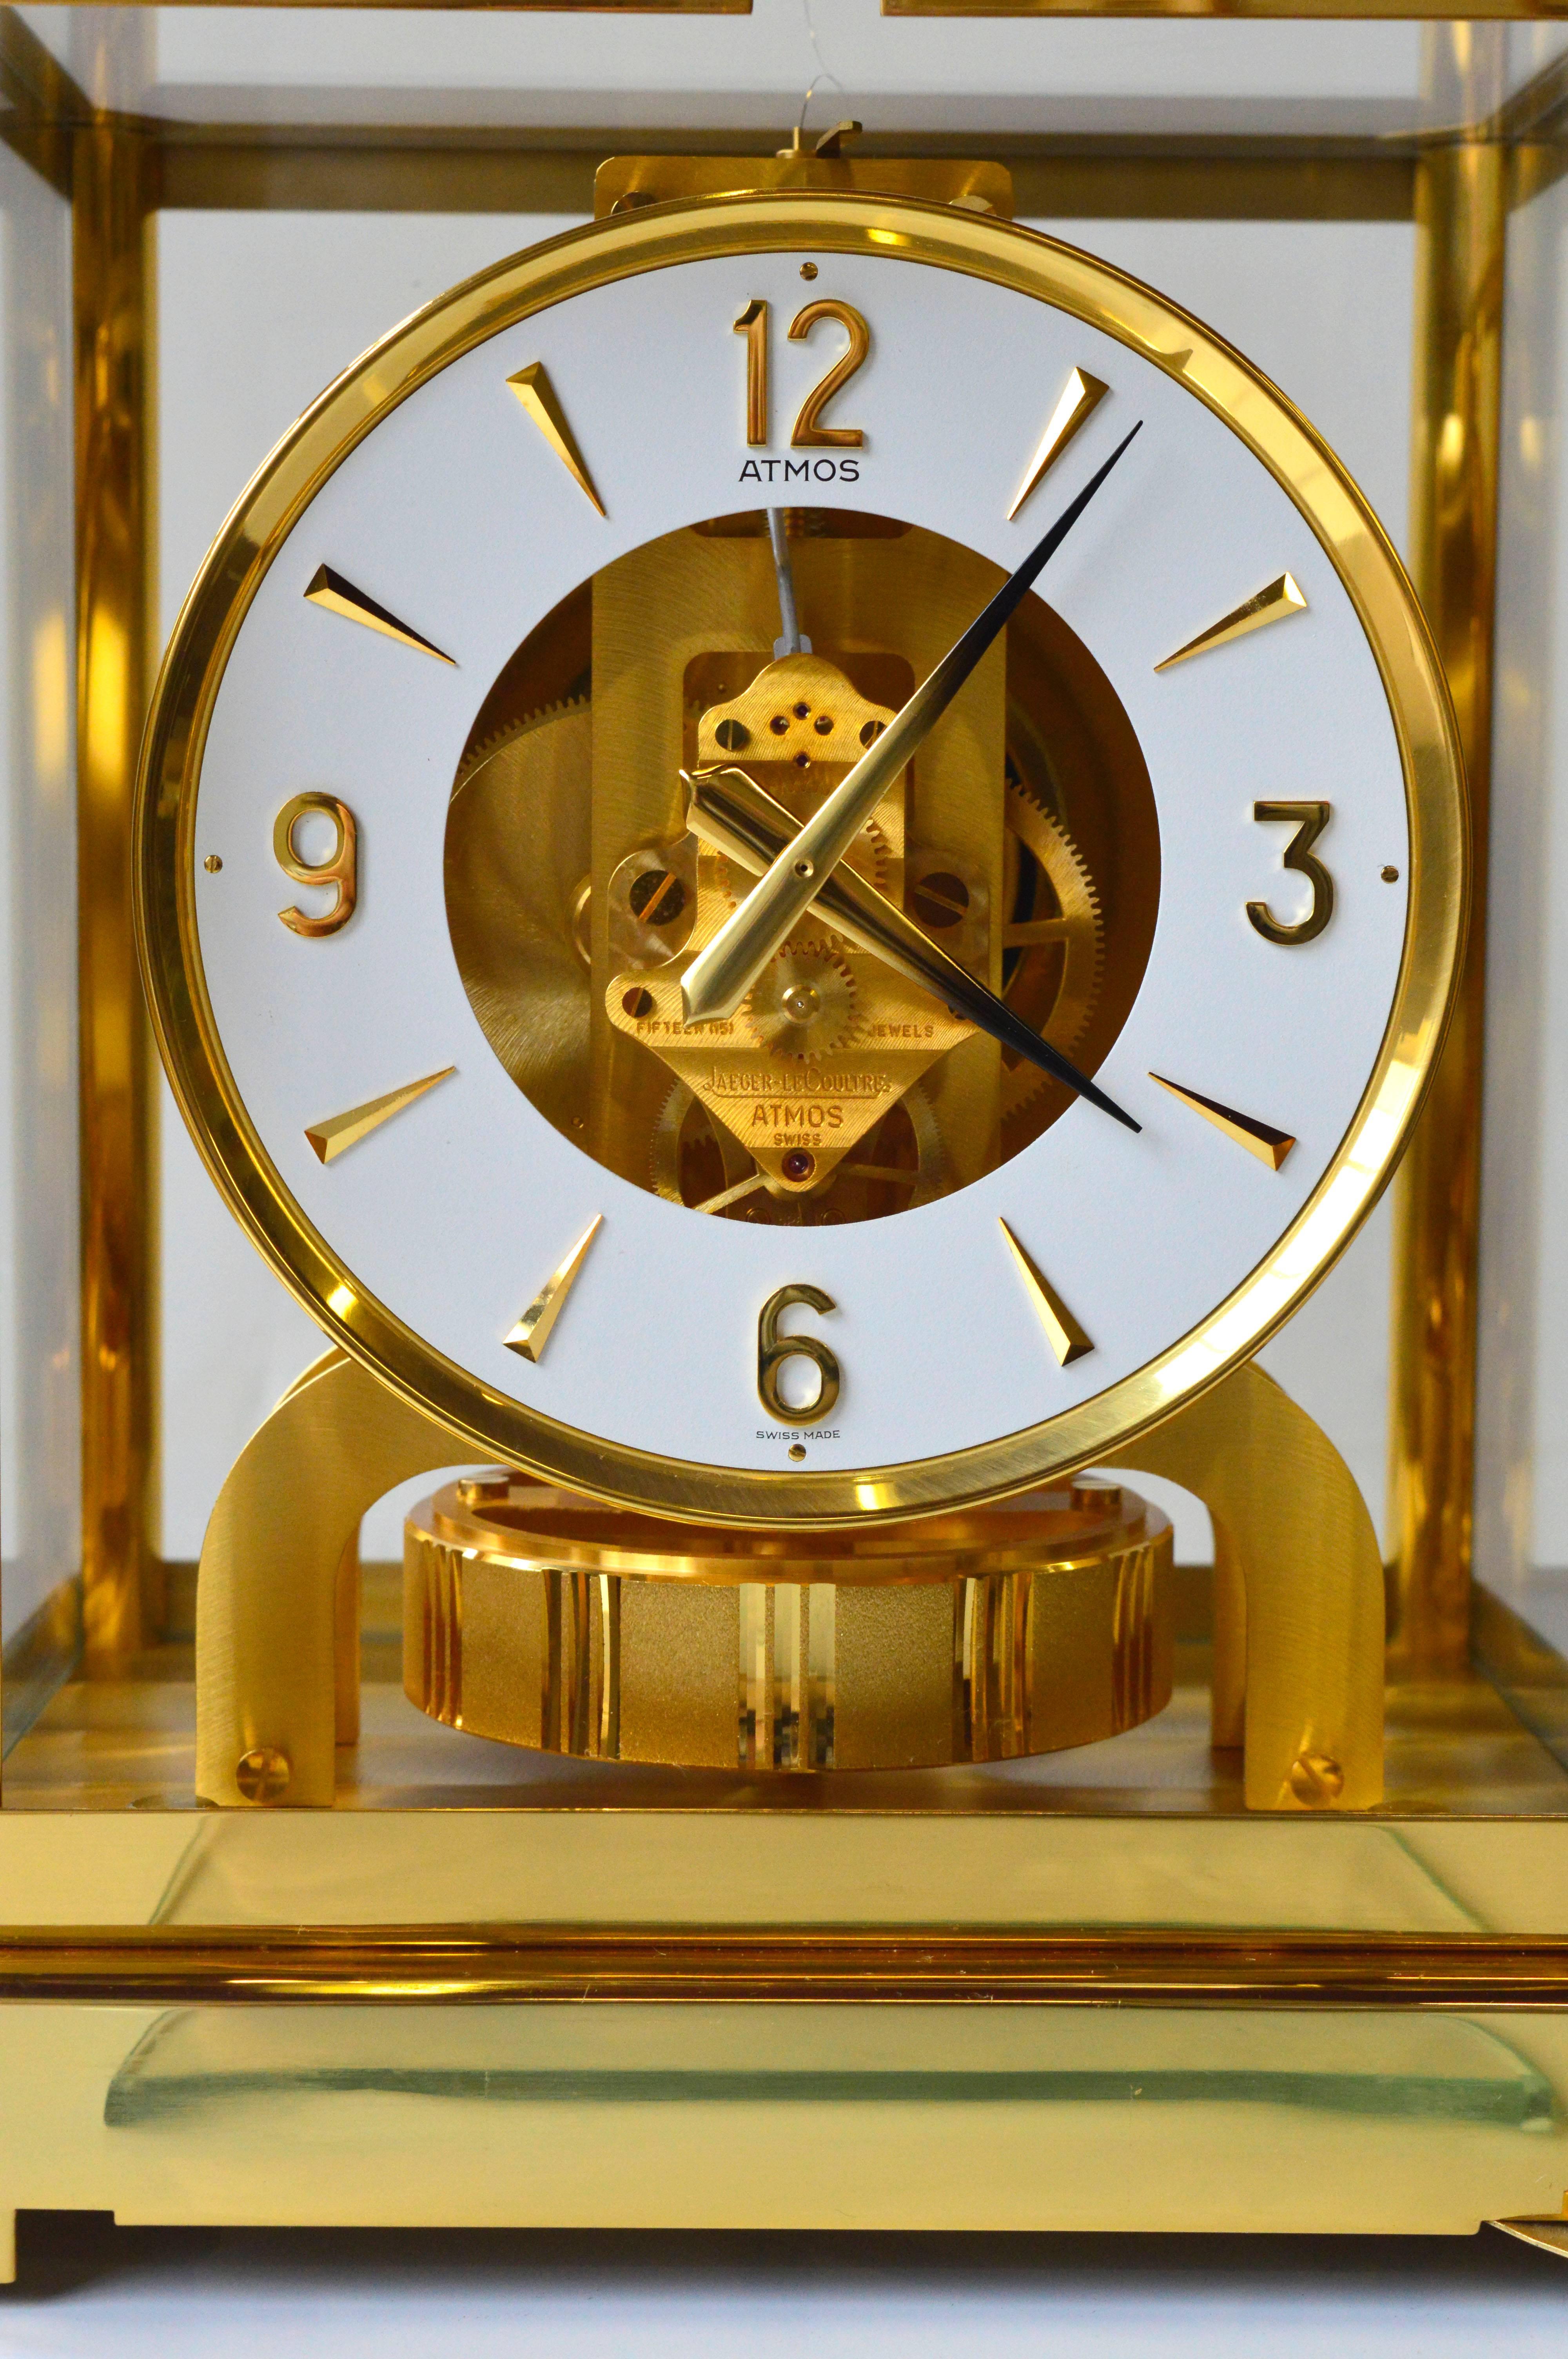 Jaeger-LeCoultre Atmos perpetual motion gold-plated 15 jewel clock. Model number 528-8, circa 1982. The clock is in perfect working order, white dial is in excellent condition, has Arabic gold-plated over brass numerals going around the clock face.